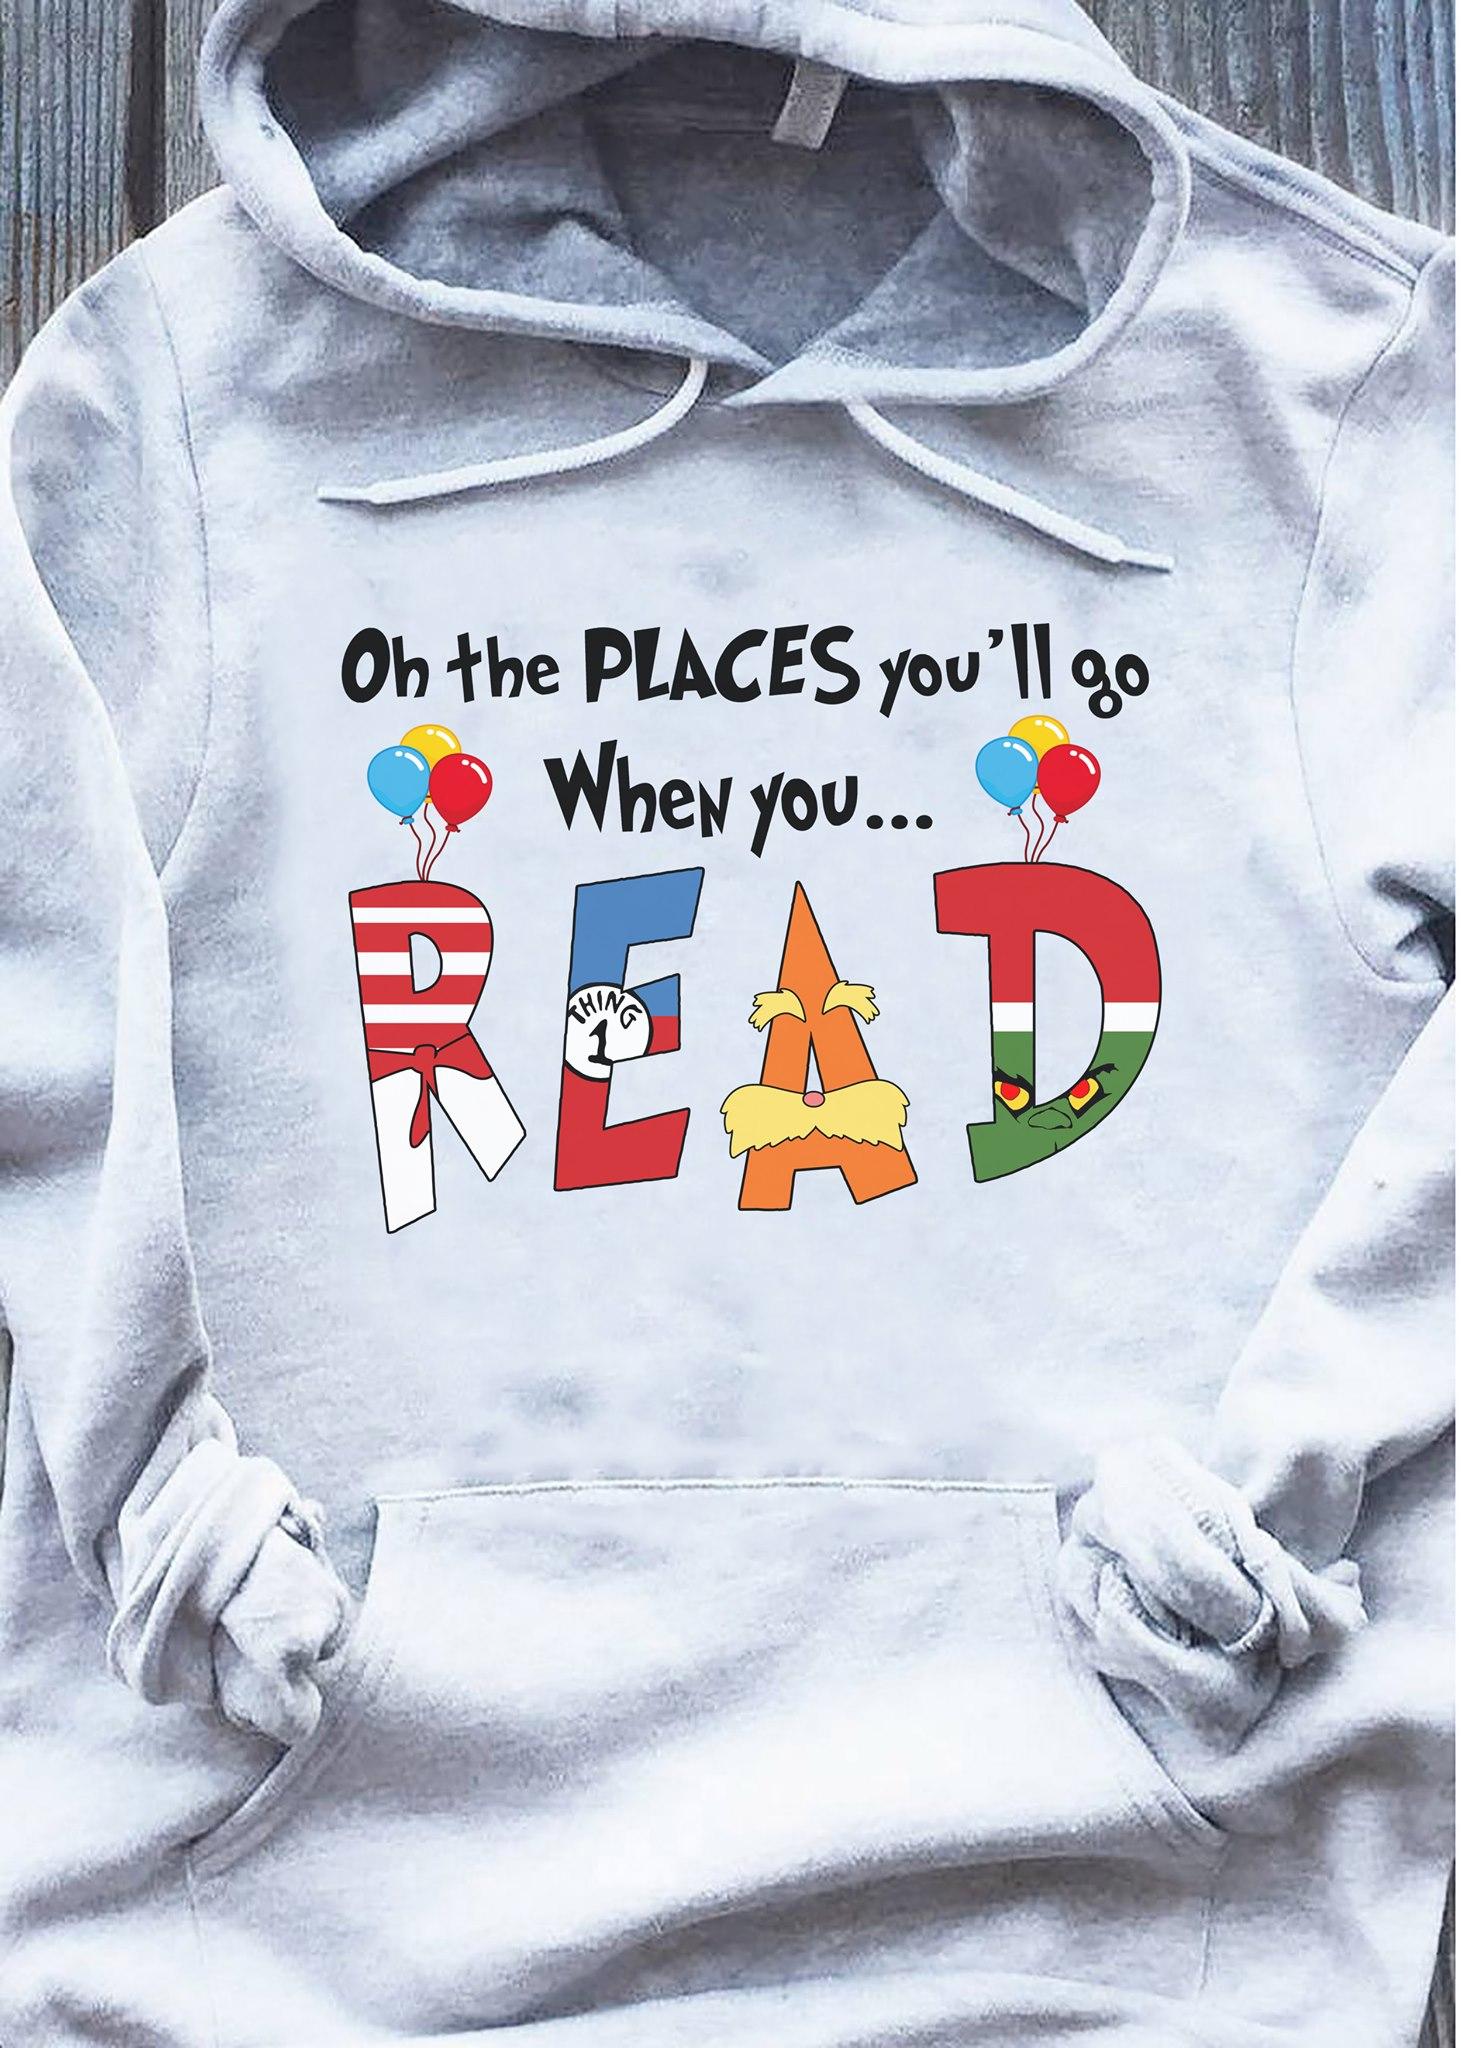 On the places you'll go when you read - Gift for book reader, bookaholic T-shirt